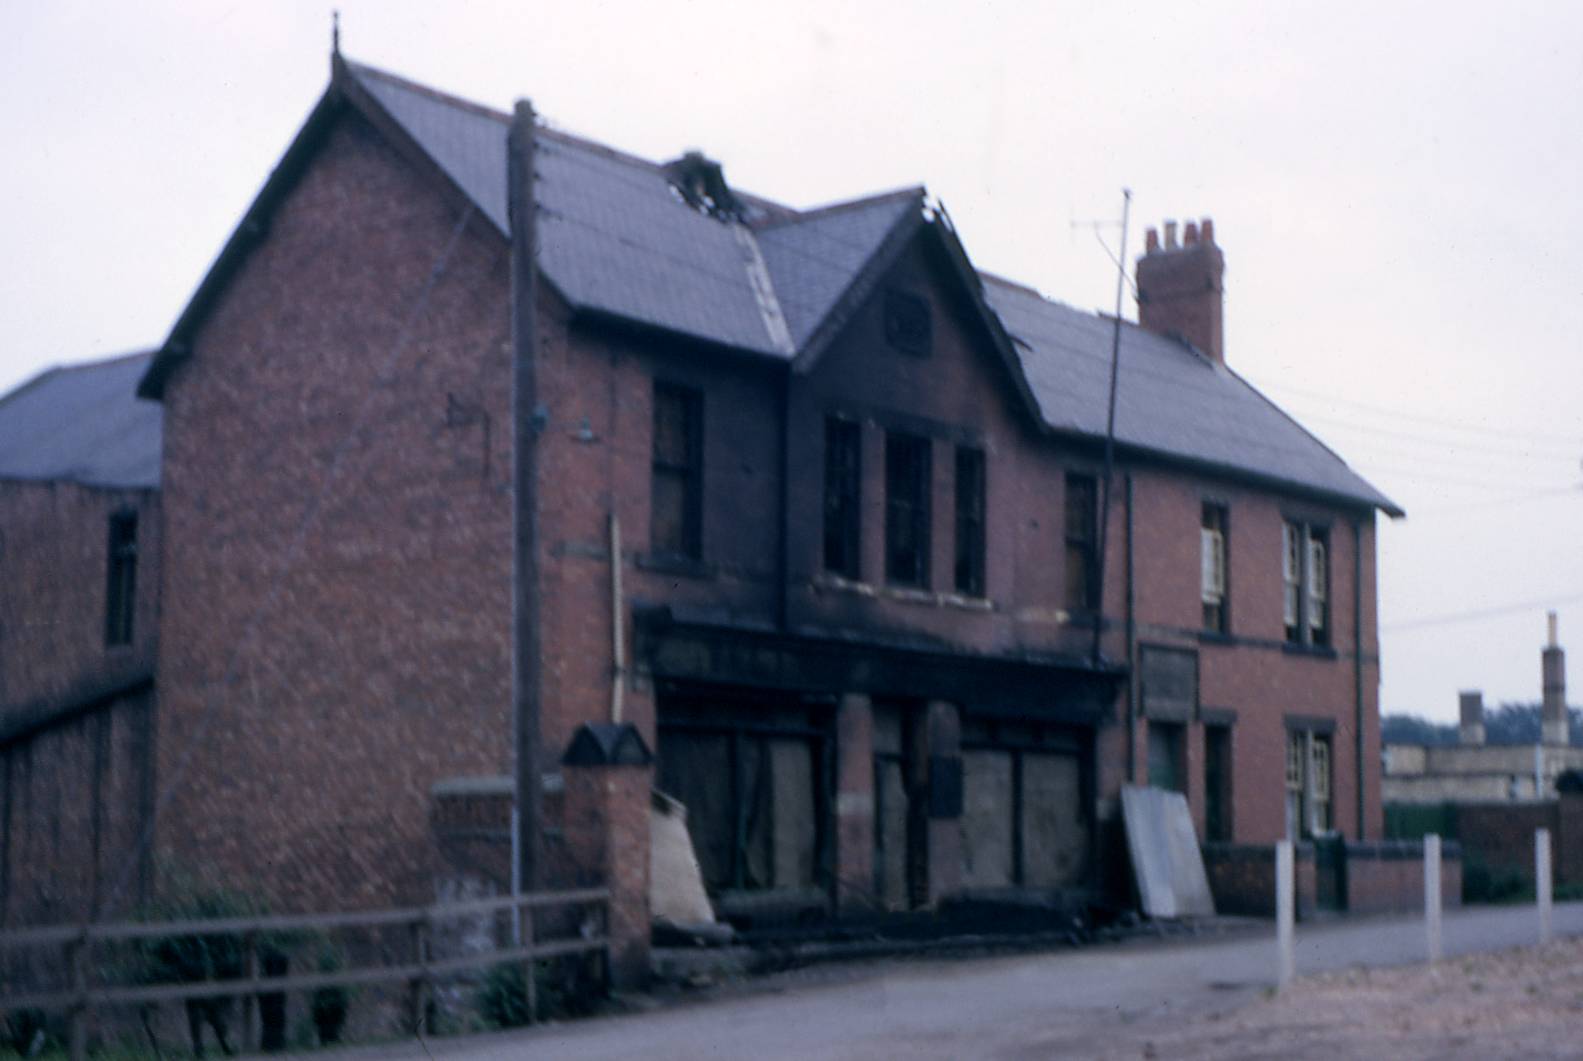 The Co-op after fire